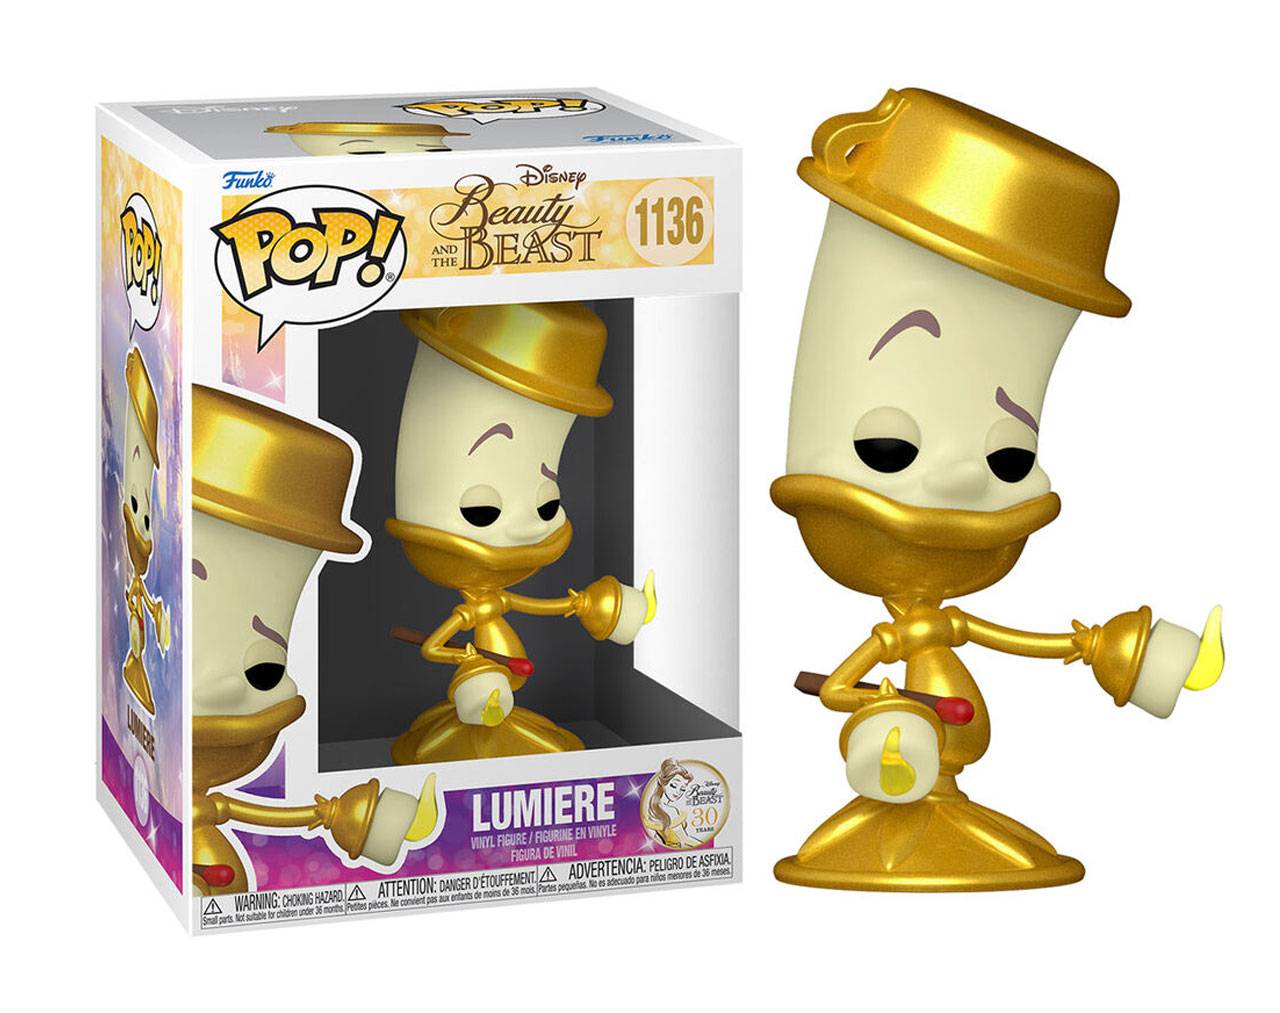 Lumiere - The Beauty and the Beast 30th Anniversary Pop! Vinyl